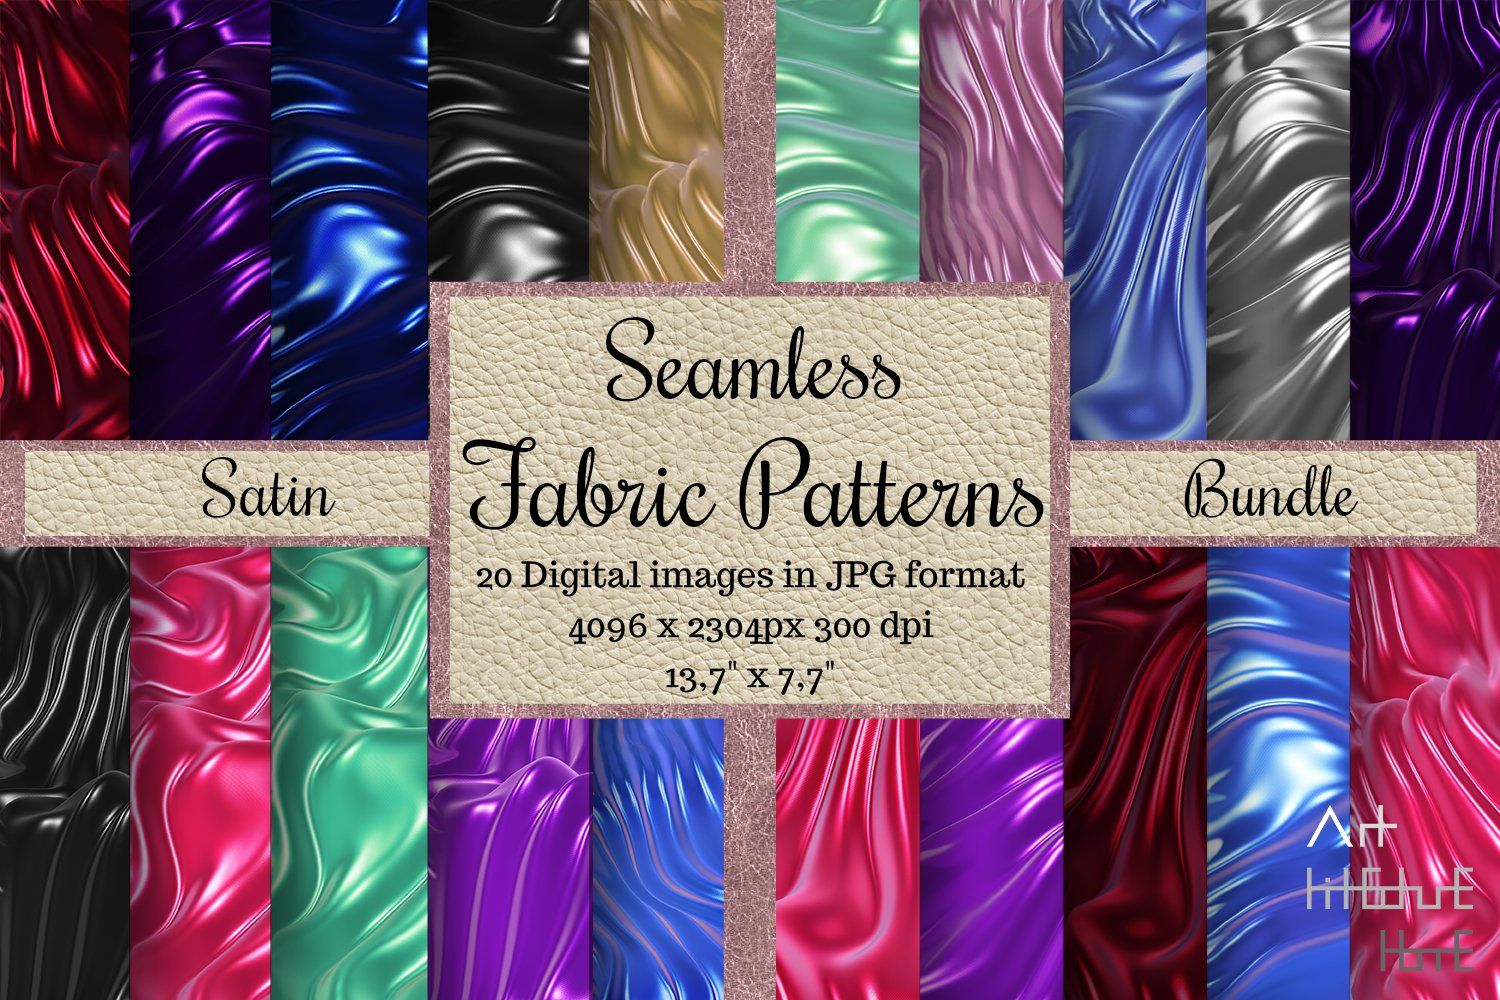 Cover image of Seamless Fabric Patterns Satin Pack.